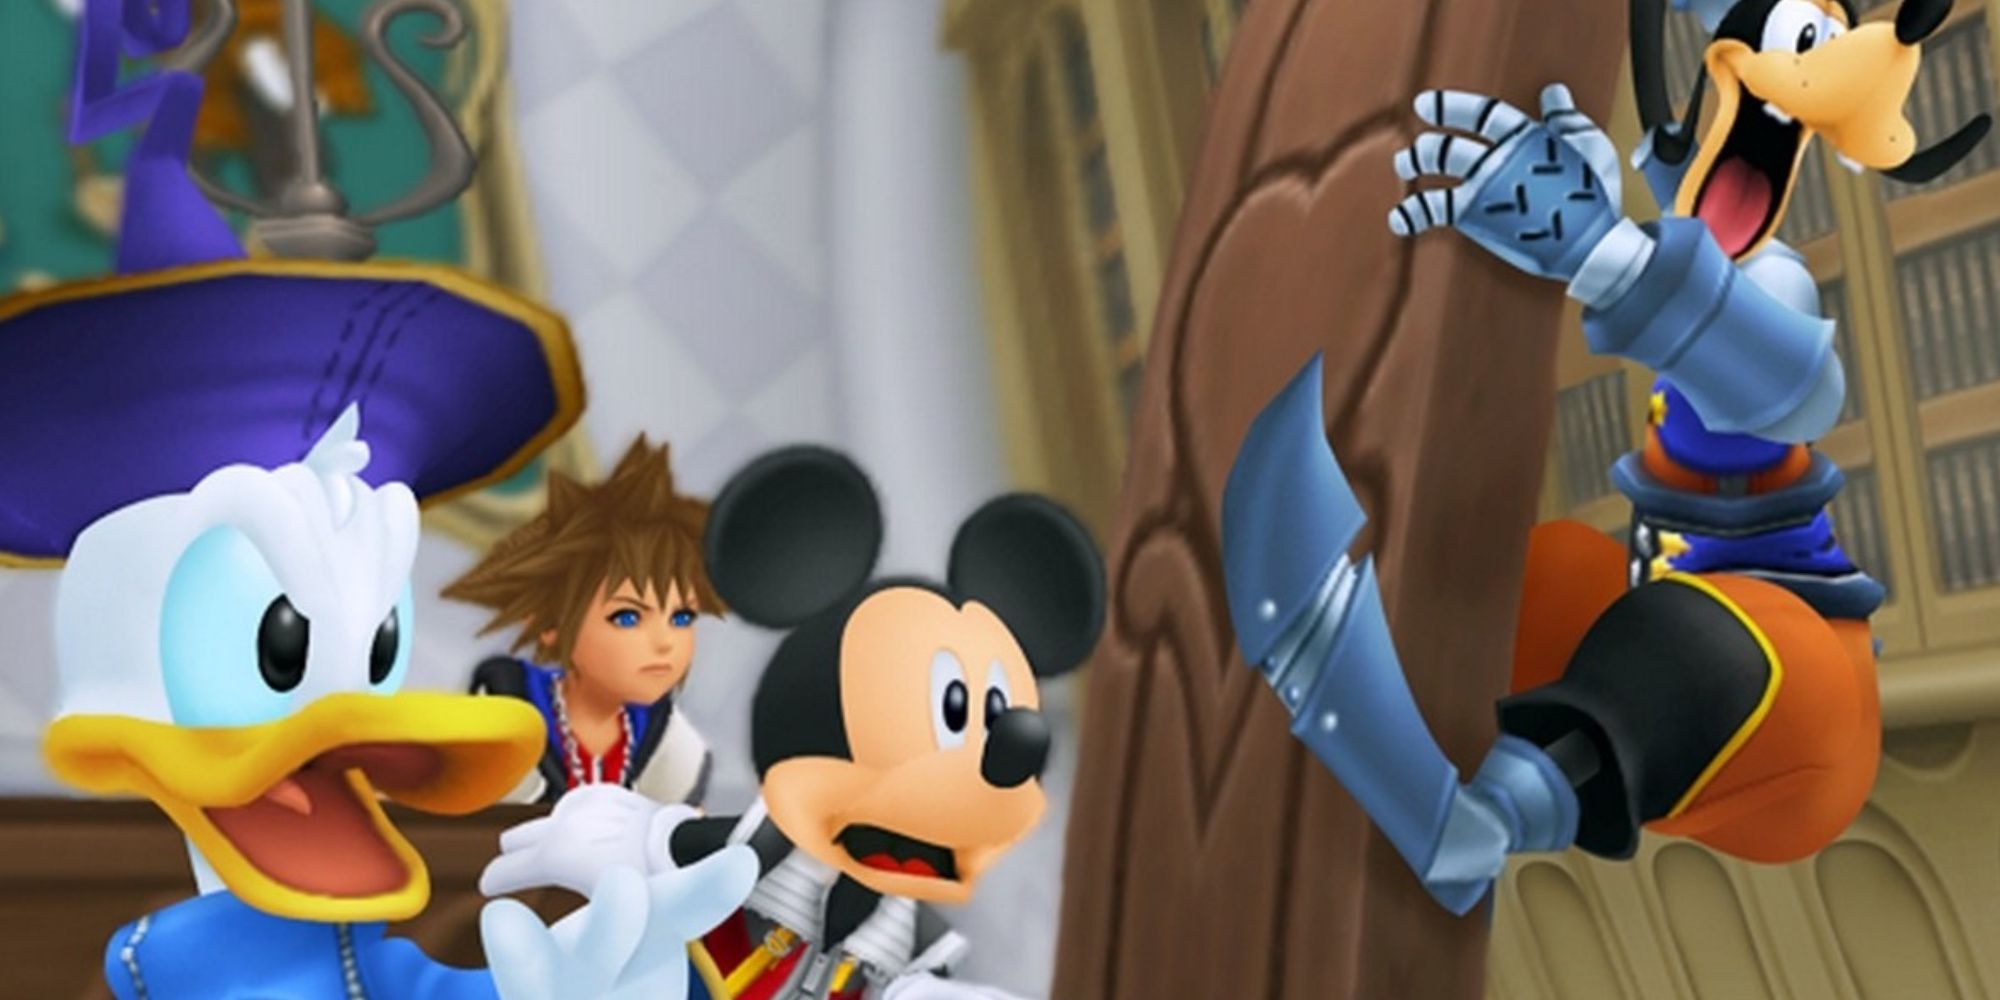 A scene featuring characters in Kingdom Hearts Recoded